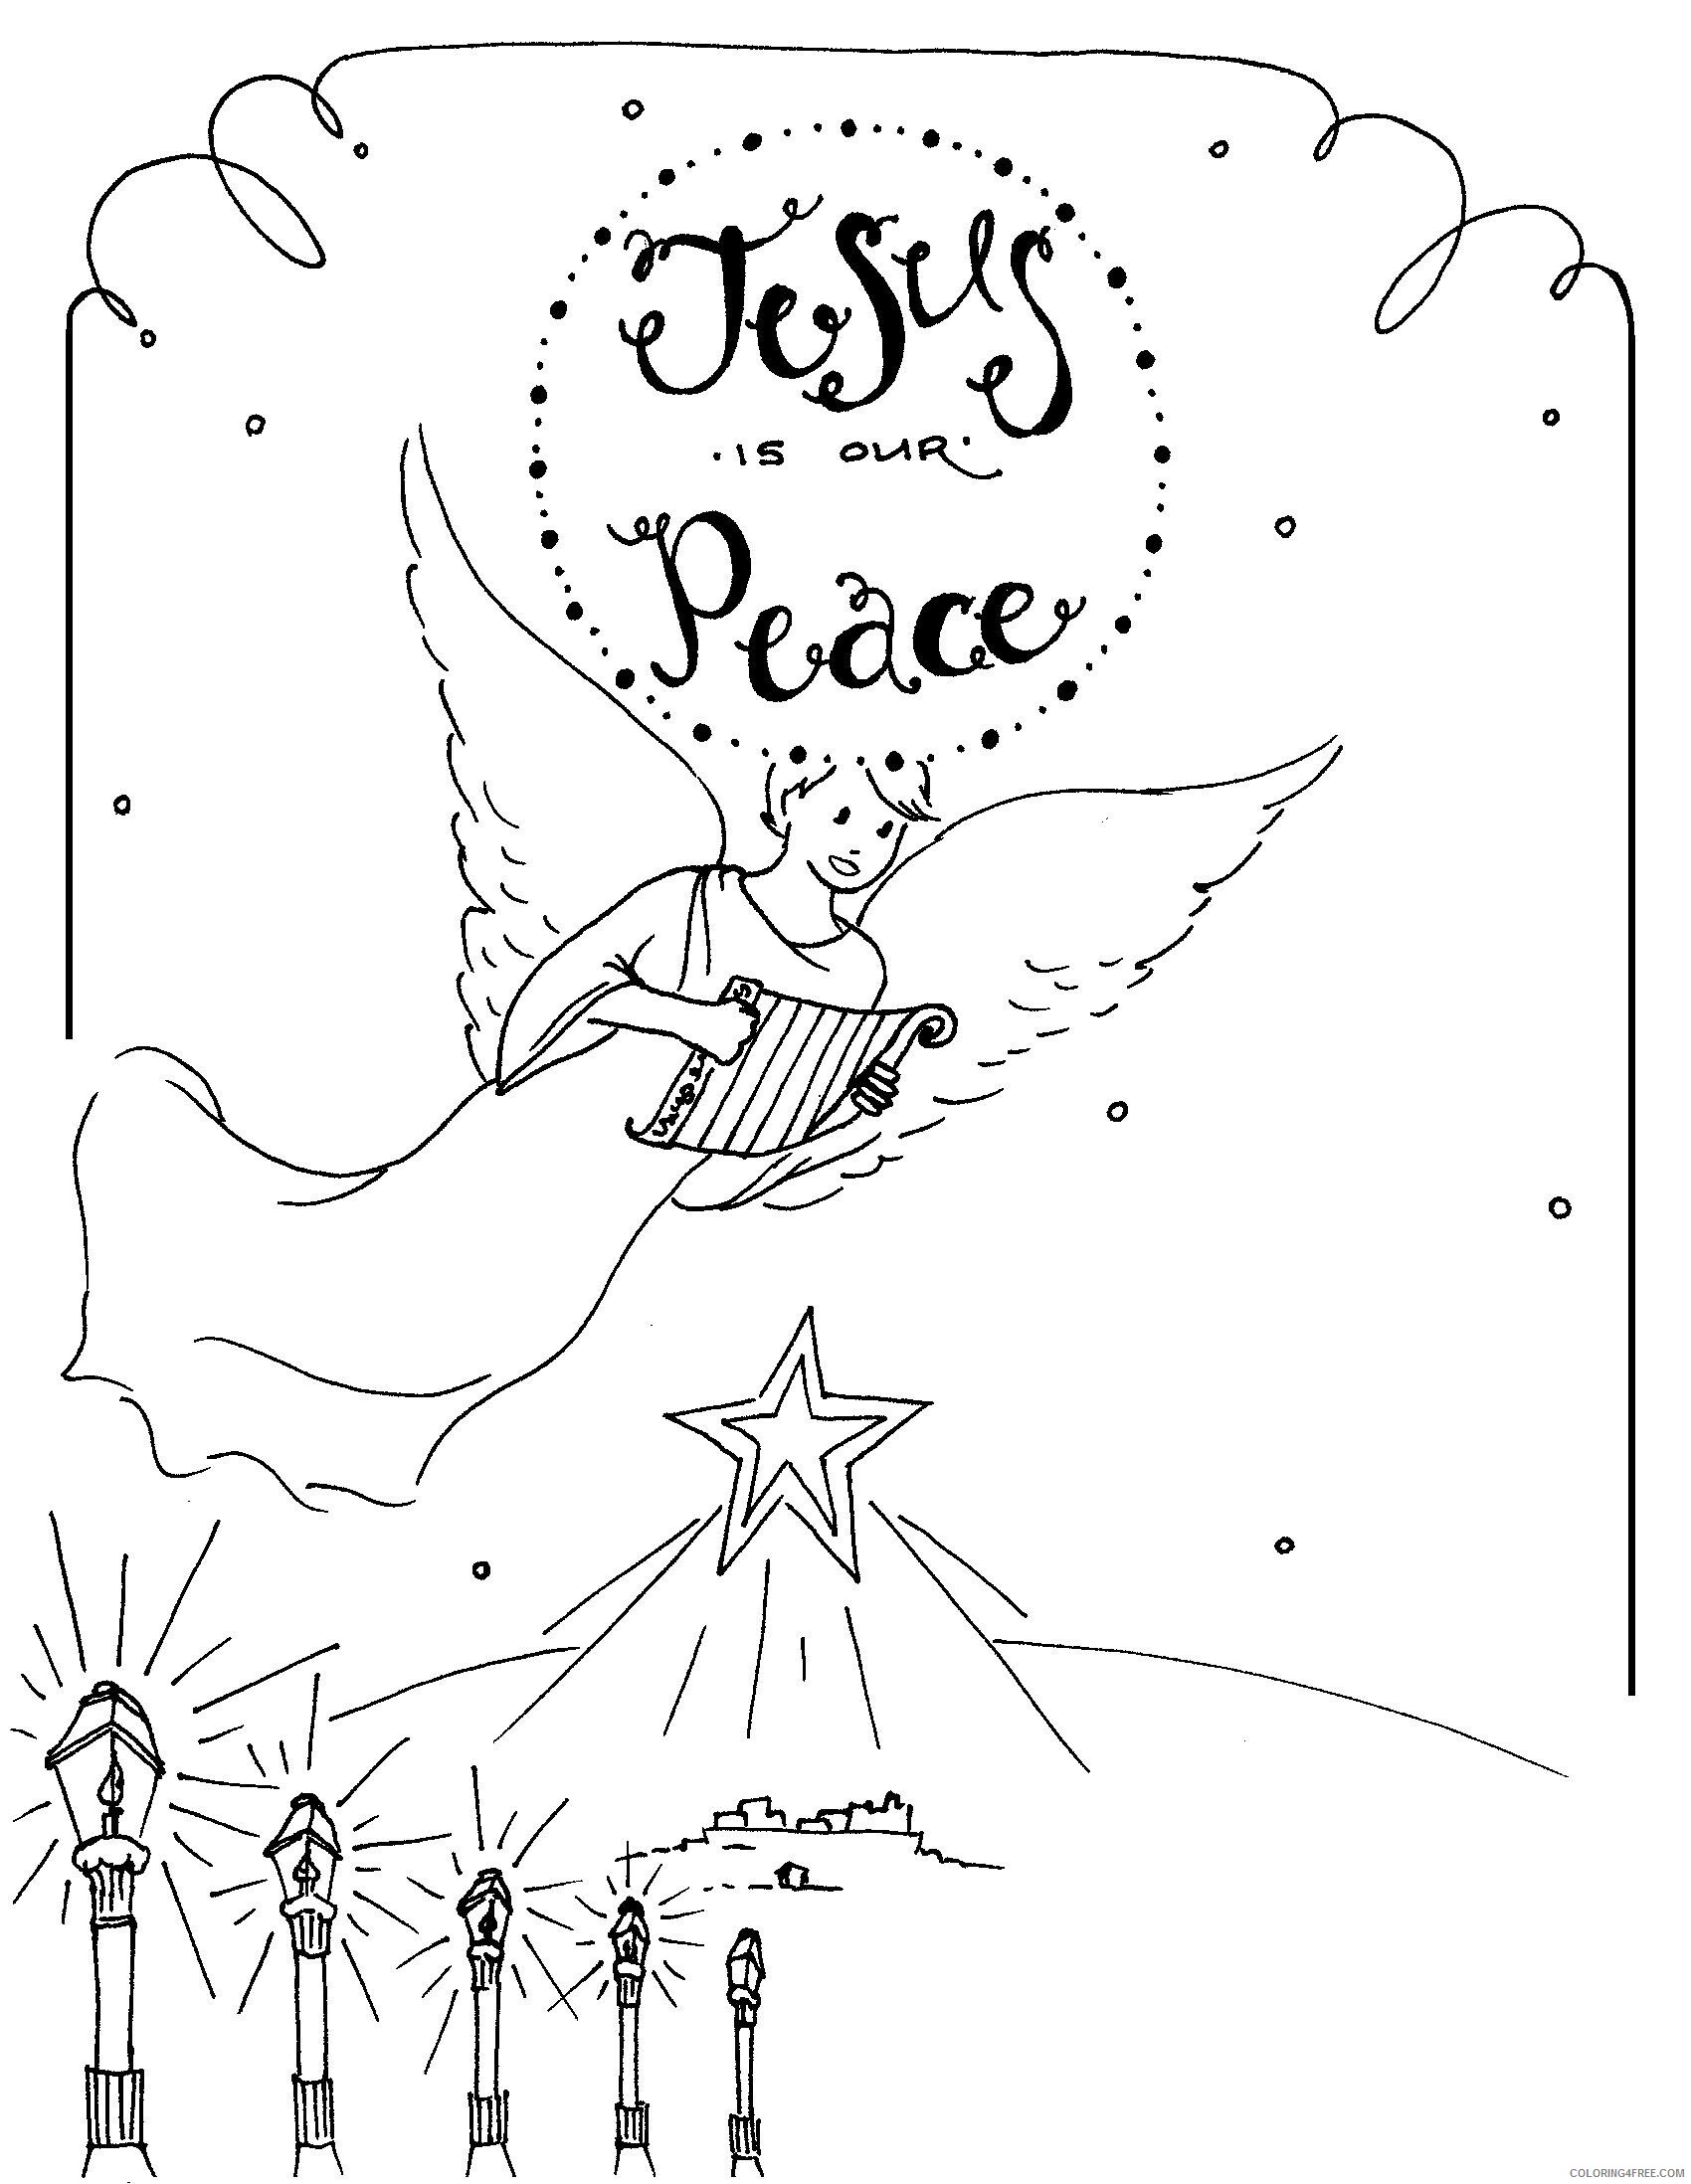 Advent Coloring Pages Free Printable Printable Sheets Angels Over Bethlehem Page 2021 a Coloring4free